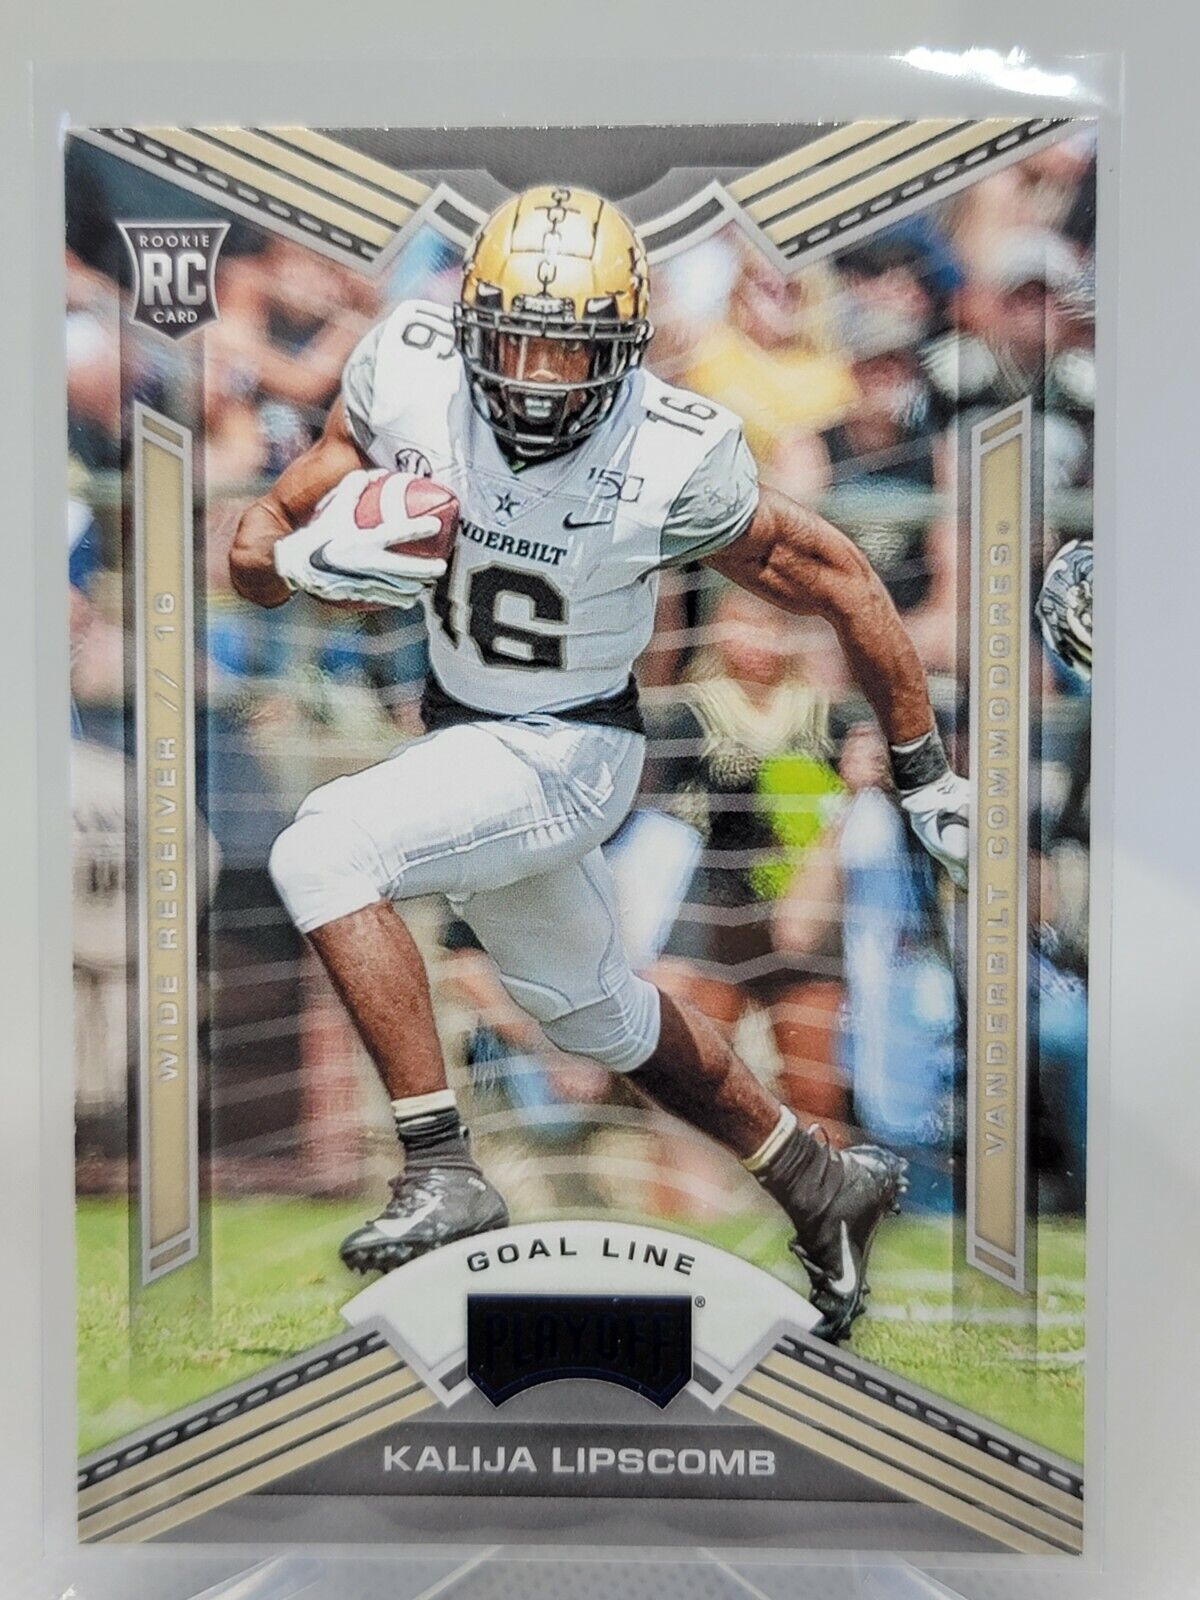 2020 Panini Chronicles Kalija Lipscomb Goal Line Blue Playoff Rookie Card 17 A2B. rookie card picture